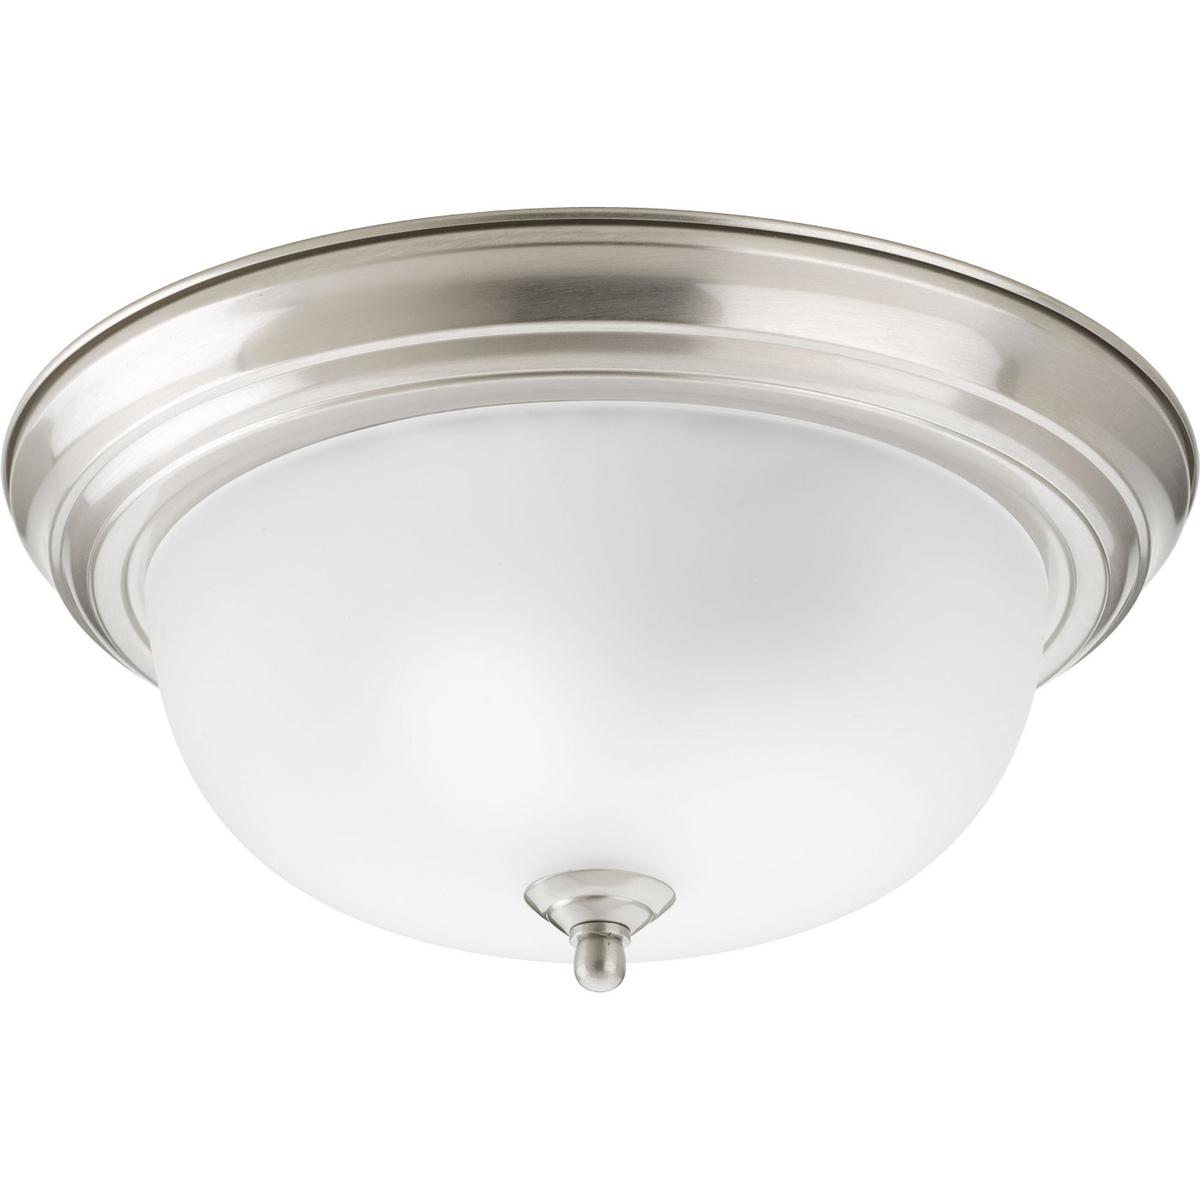 Hubbell P3925-09ET Two-light flush mount with dome shaped etched glass, solid trim and decorative knobs. Center lock-up with matching finial.  ; Brushed Nickel finish. ; Etched glass. ; Decorative details.